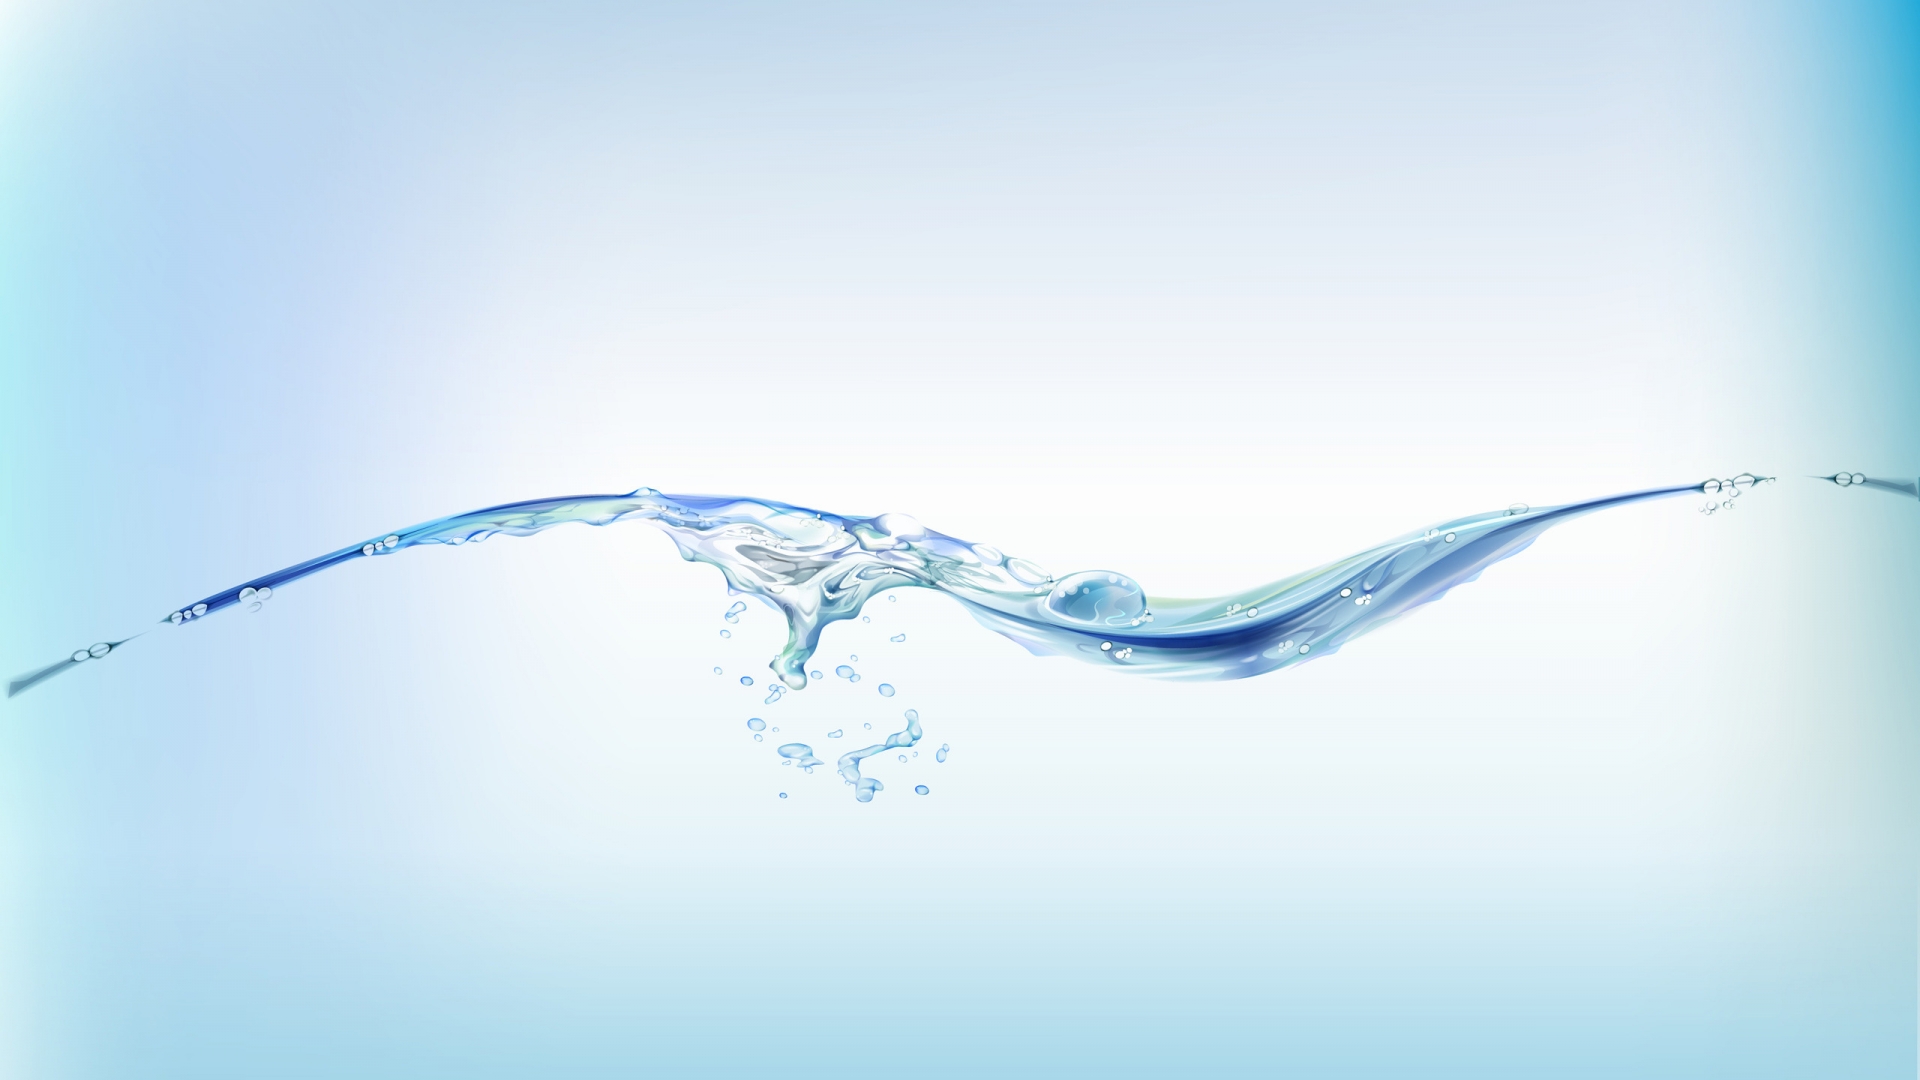 Minimal Water for 1920 x 1080 HDTV 1080p resolution